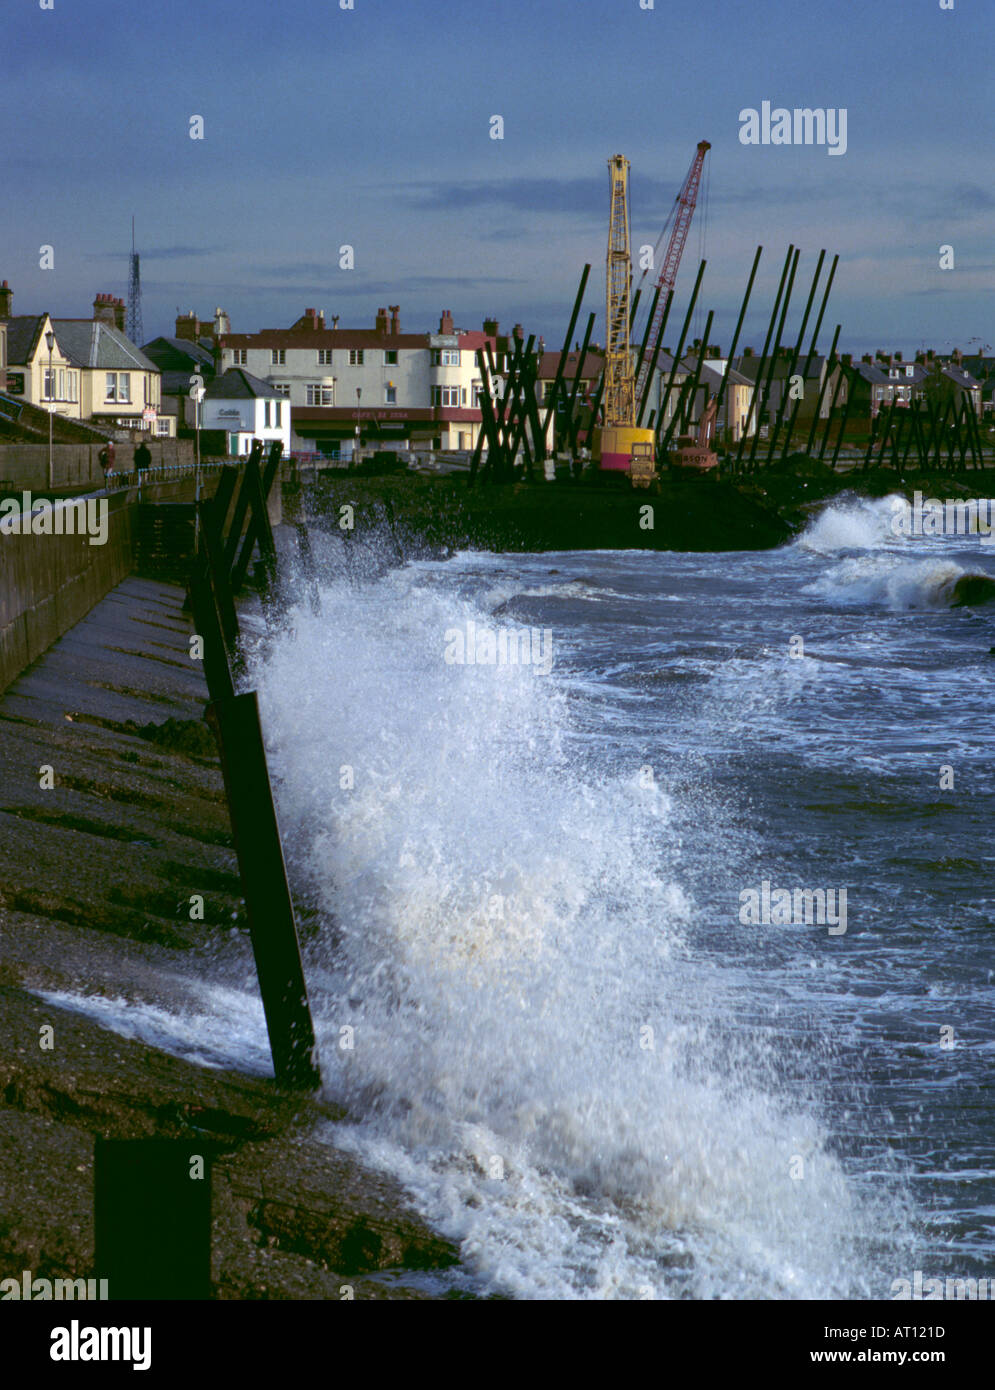 Coastal defence; construction of a new reinforced concrete wave wall at Newbiggin-by-the-Sea, Northumberland, England, UK., 1989. Stock Photo